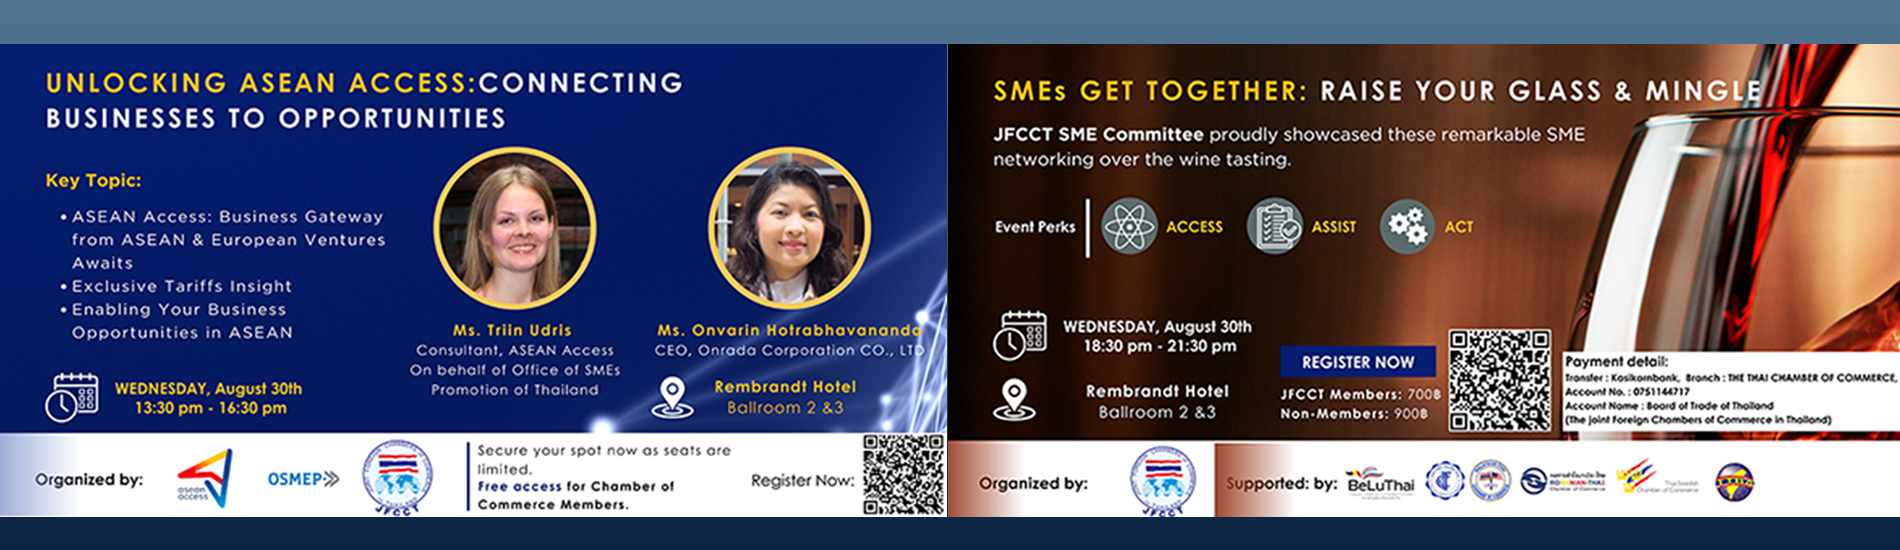 Unlocking Asean Access and SMEs Get Together by JFCCT SME Committee and OSMEP